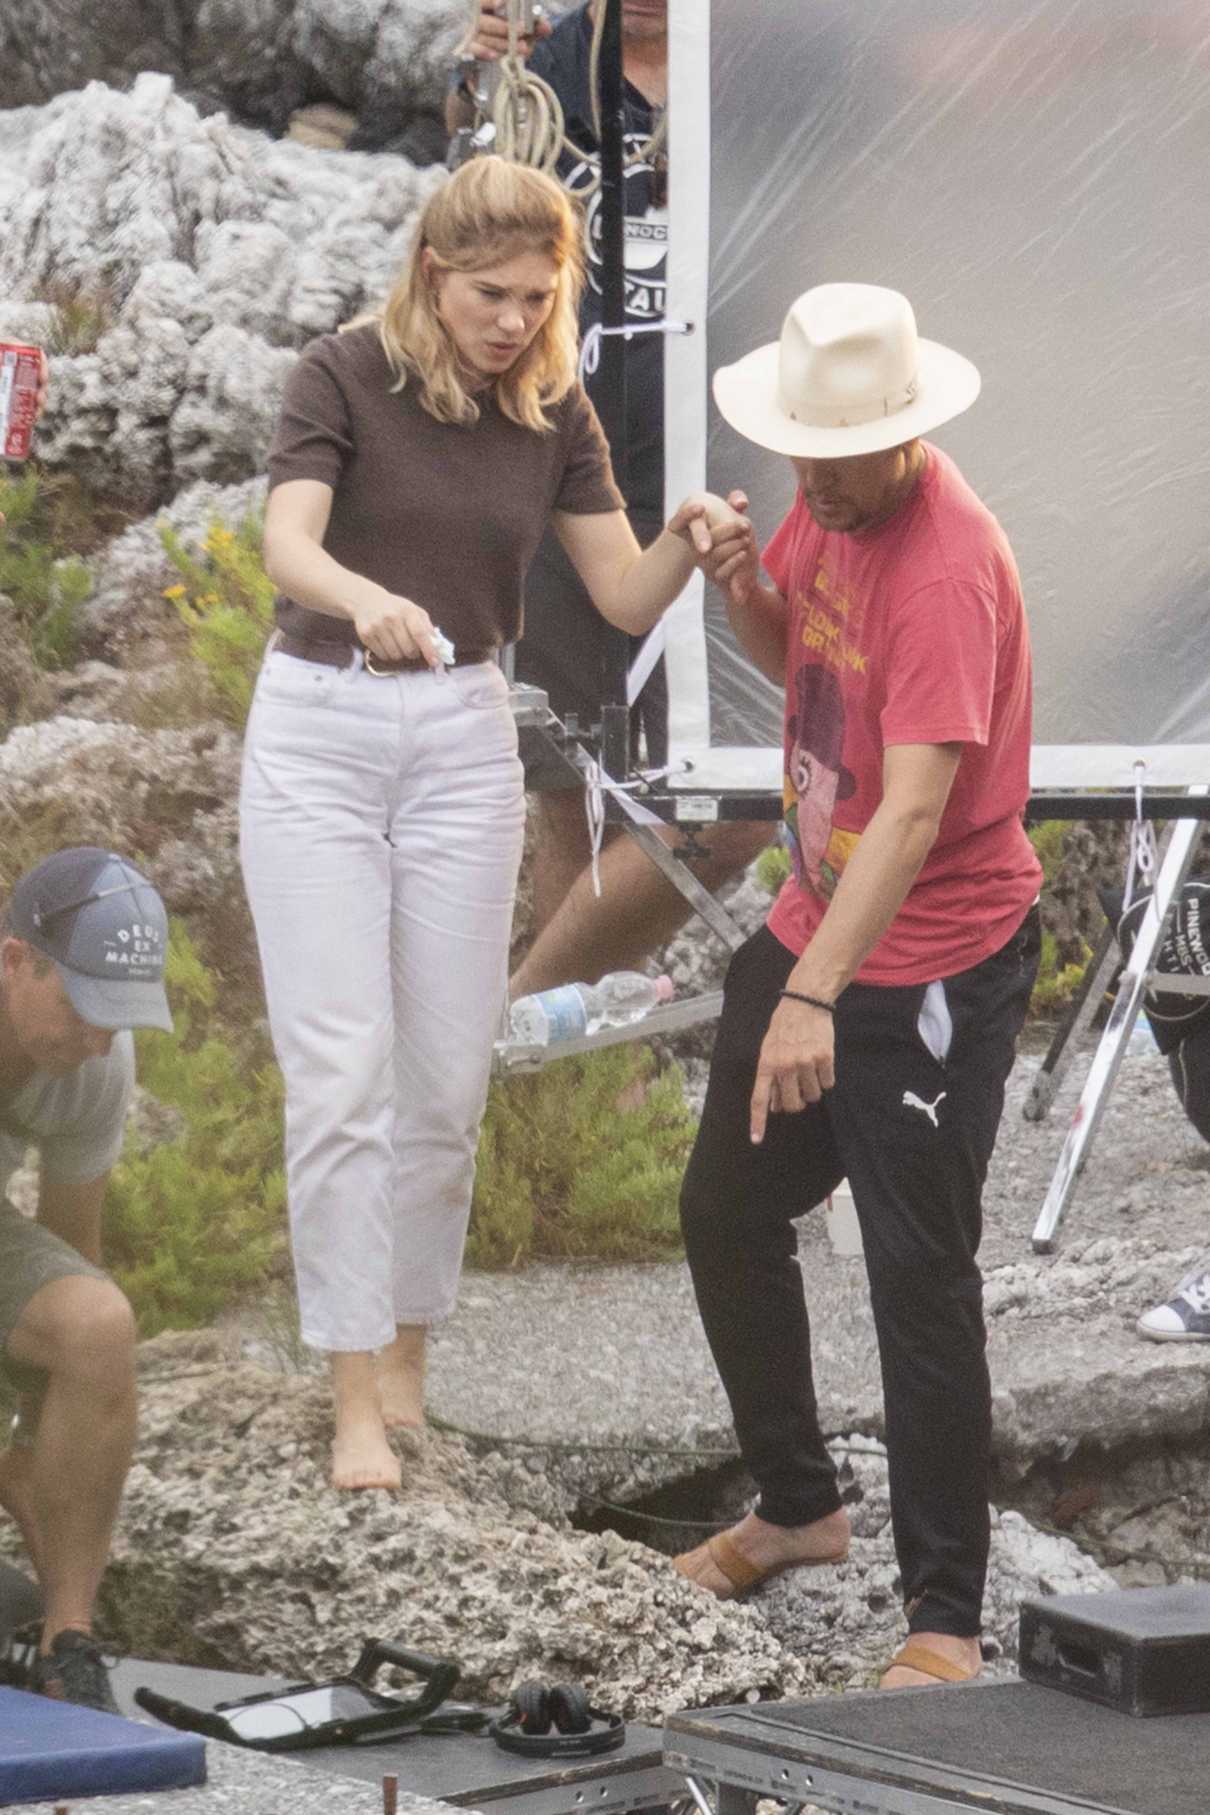 lea-seydoux-in-a-brown-tee-on-the-set-of-james-bond-no-time-to-die-in-southern-italy-09-26-2019-4.jpg